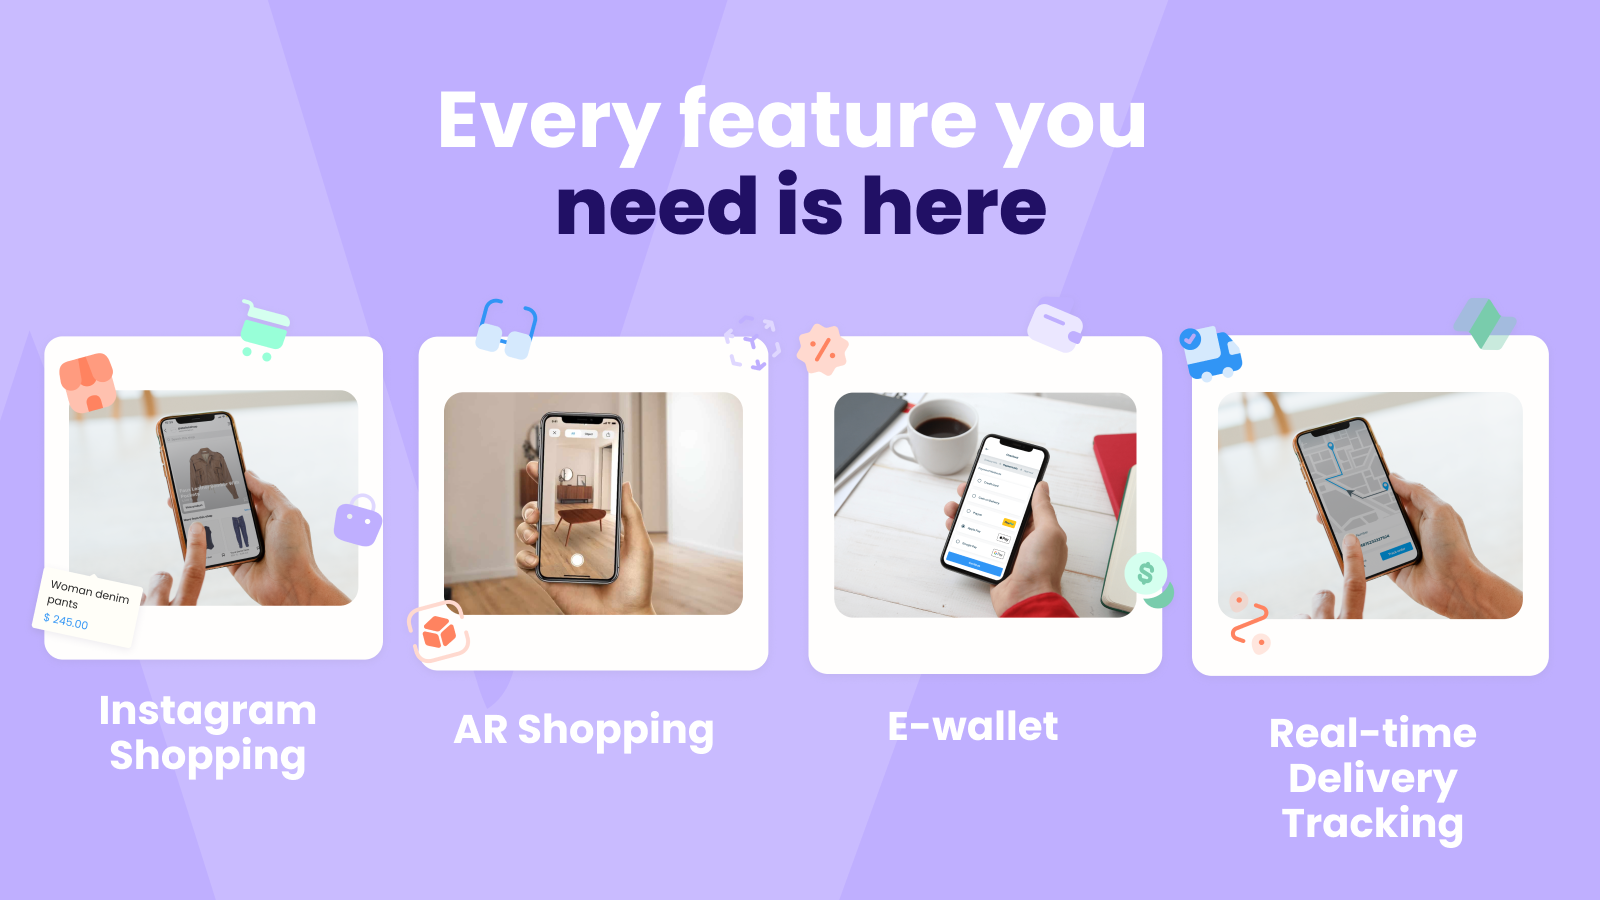 Activate the features you like, without any additional price.